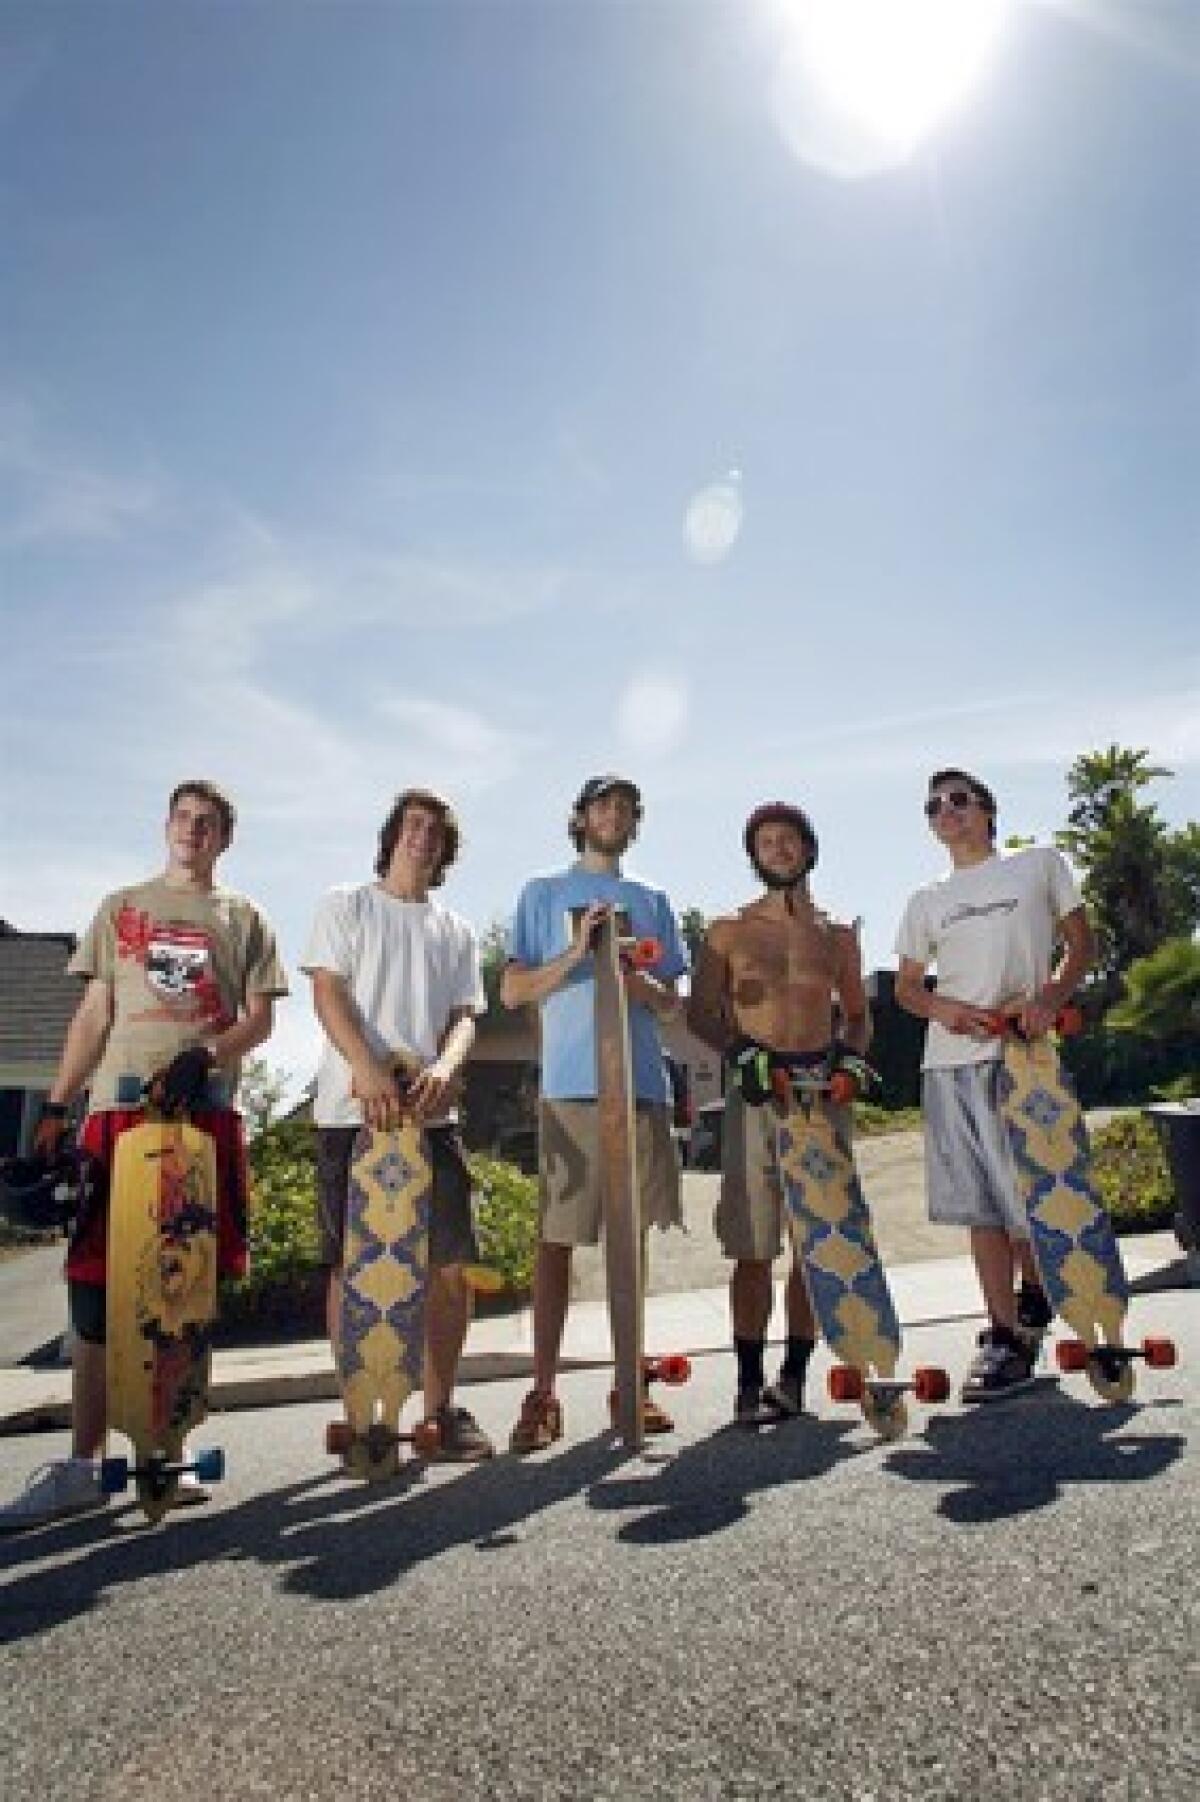 Longboarders are shown at the popular Franklin Street hill in Santa Monica. From left, Kevin Reimer, 19, of Vancouver, Canada; James Kelly, 18, of Petaluma, Calif.; Adam Stokowski, 23, of Springfield, Va.; Adam Colton, 25, of Santa Monica; and Louis Pilloni, 22, of Thousand Oaks.